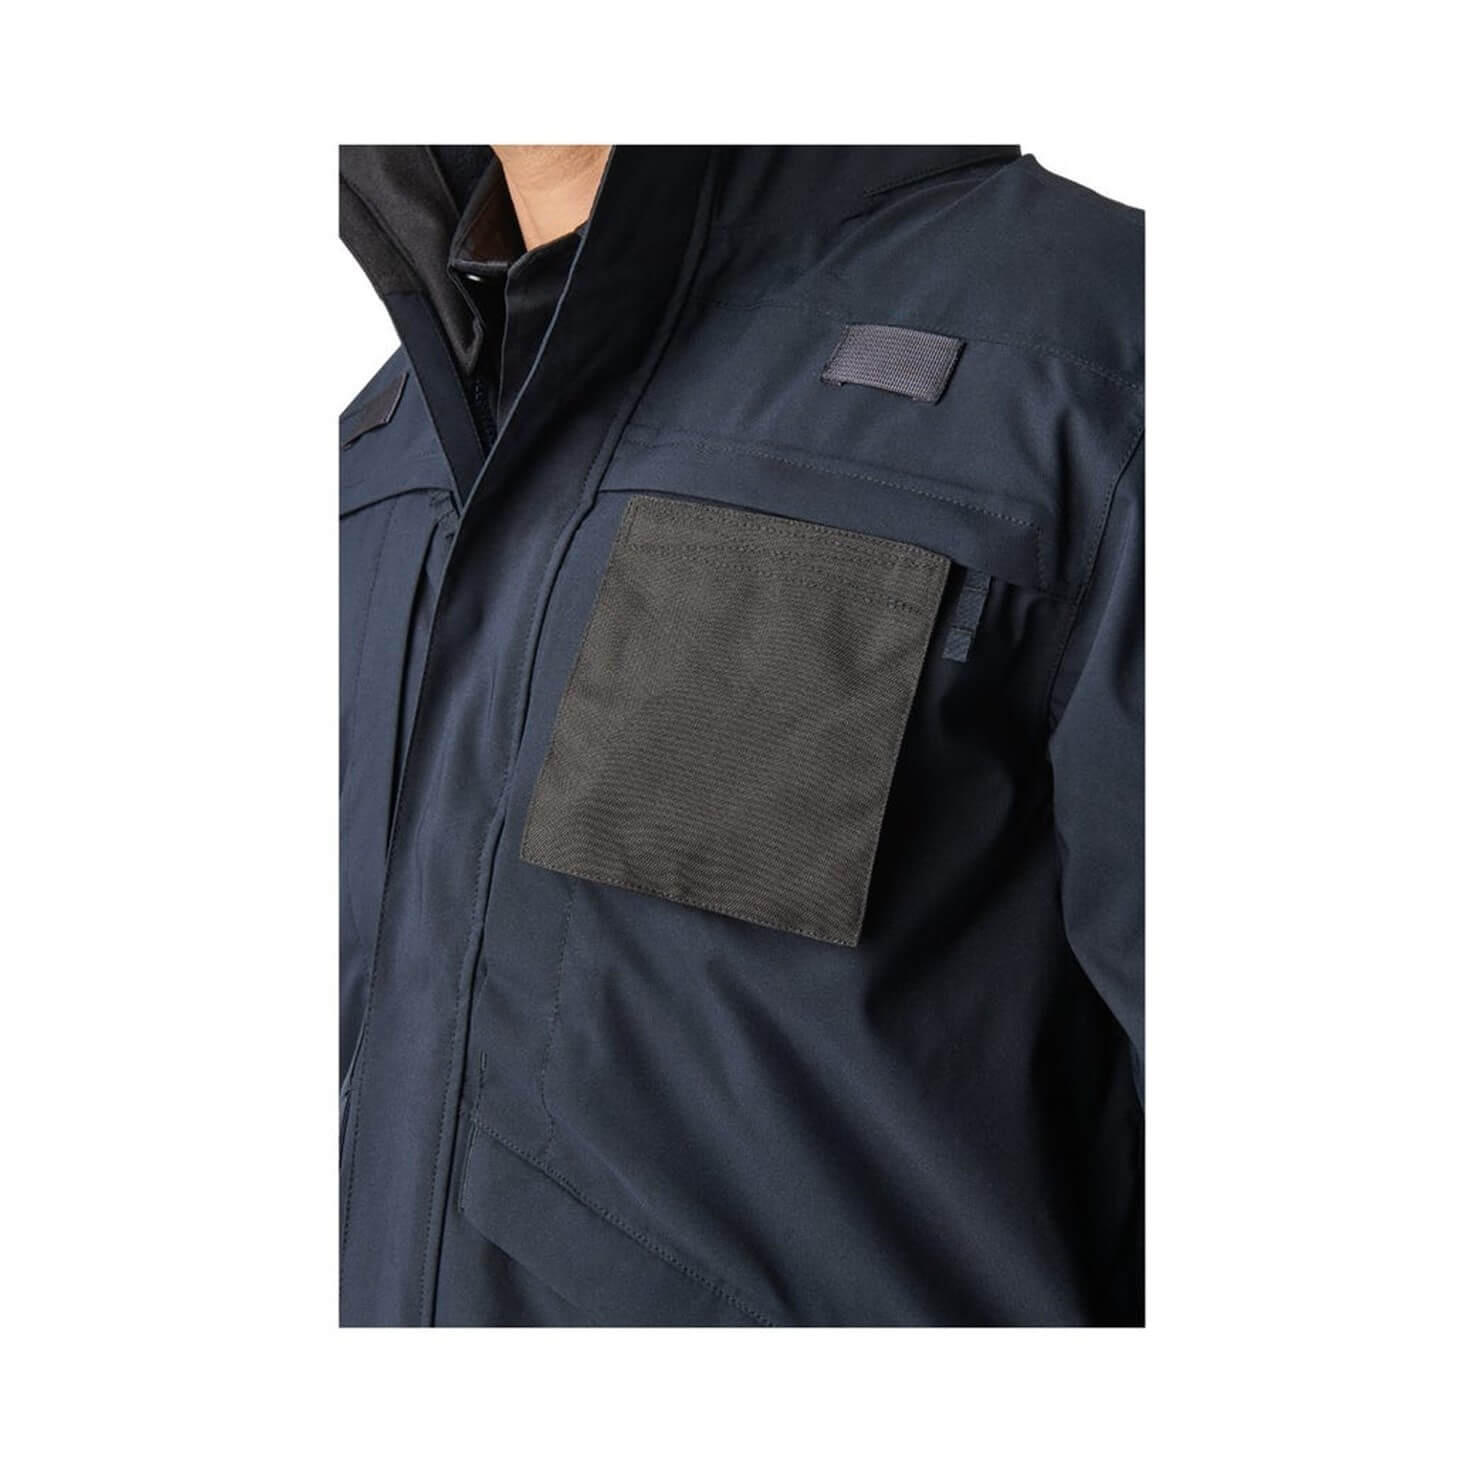 5.11 Tactical 3 in 1 Parka 2.0 ; 48358